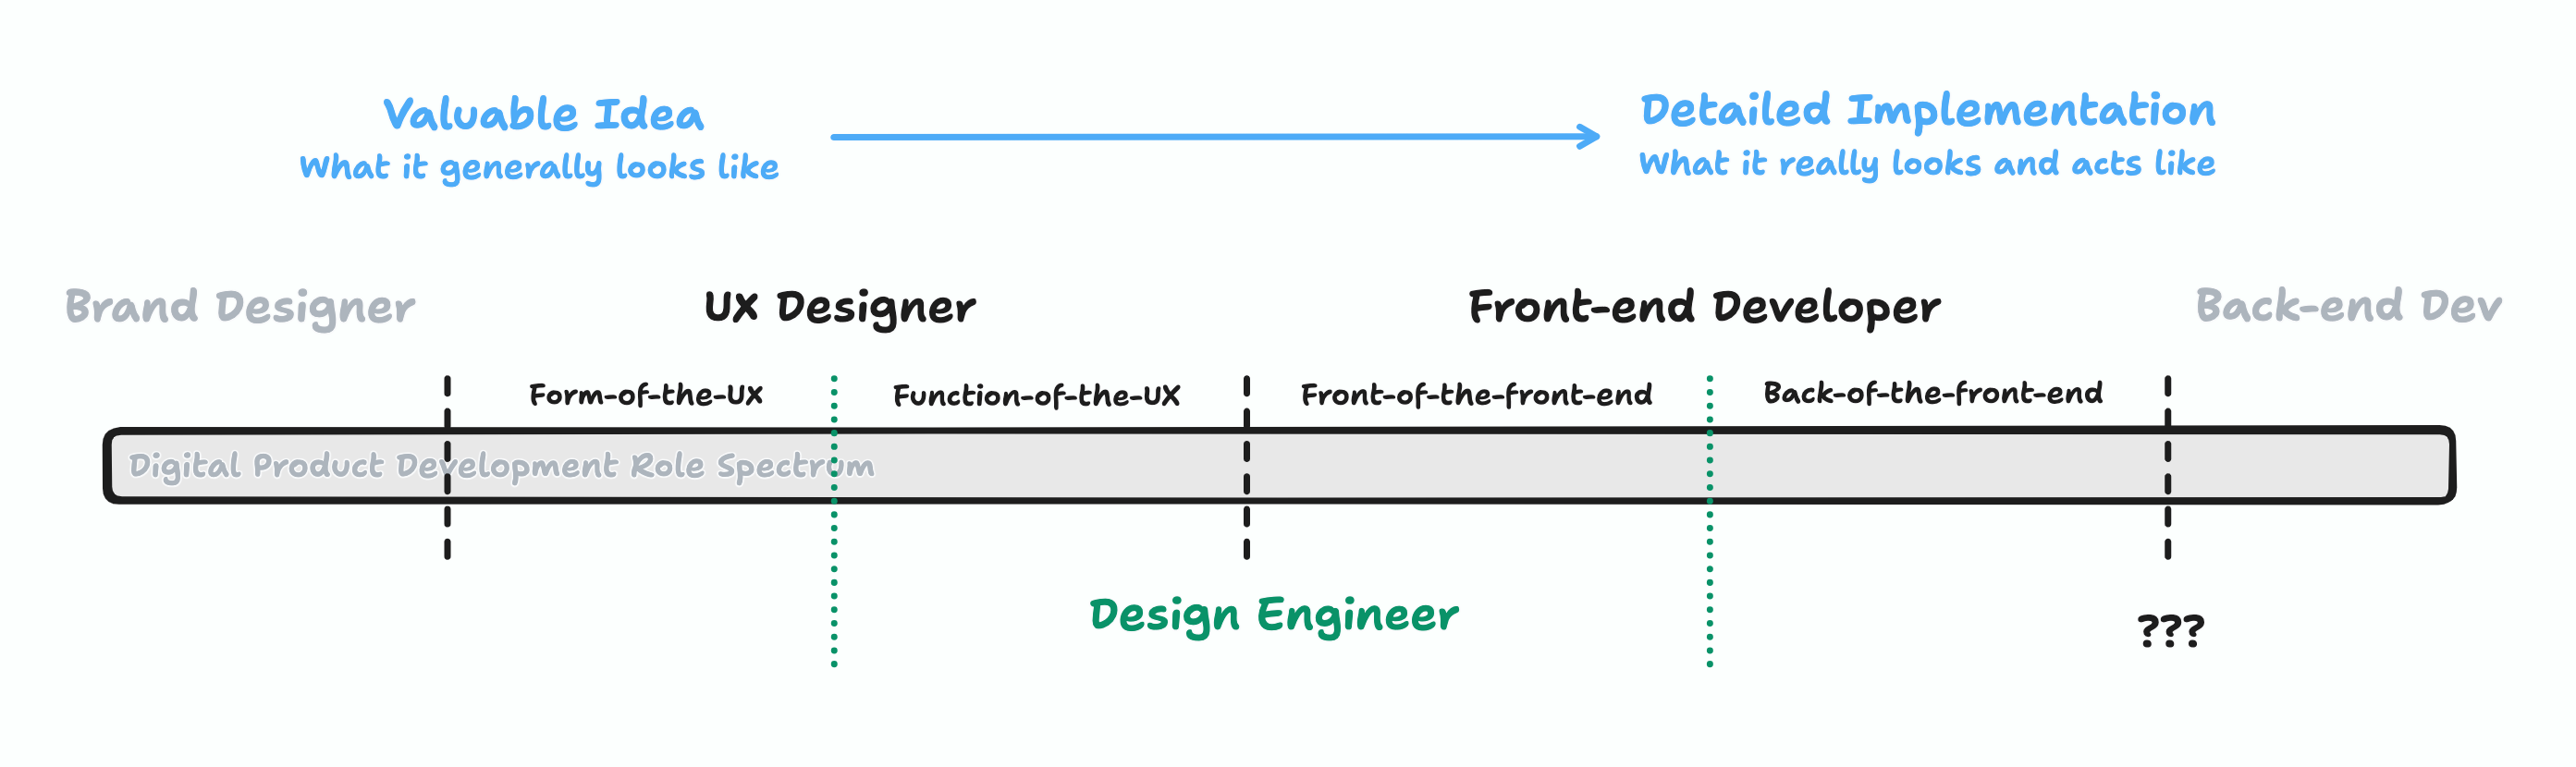 Digital product role spectrum chart: showing Design Engineer as a role that overlaps between UX Designer and Front-end Developer.